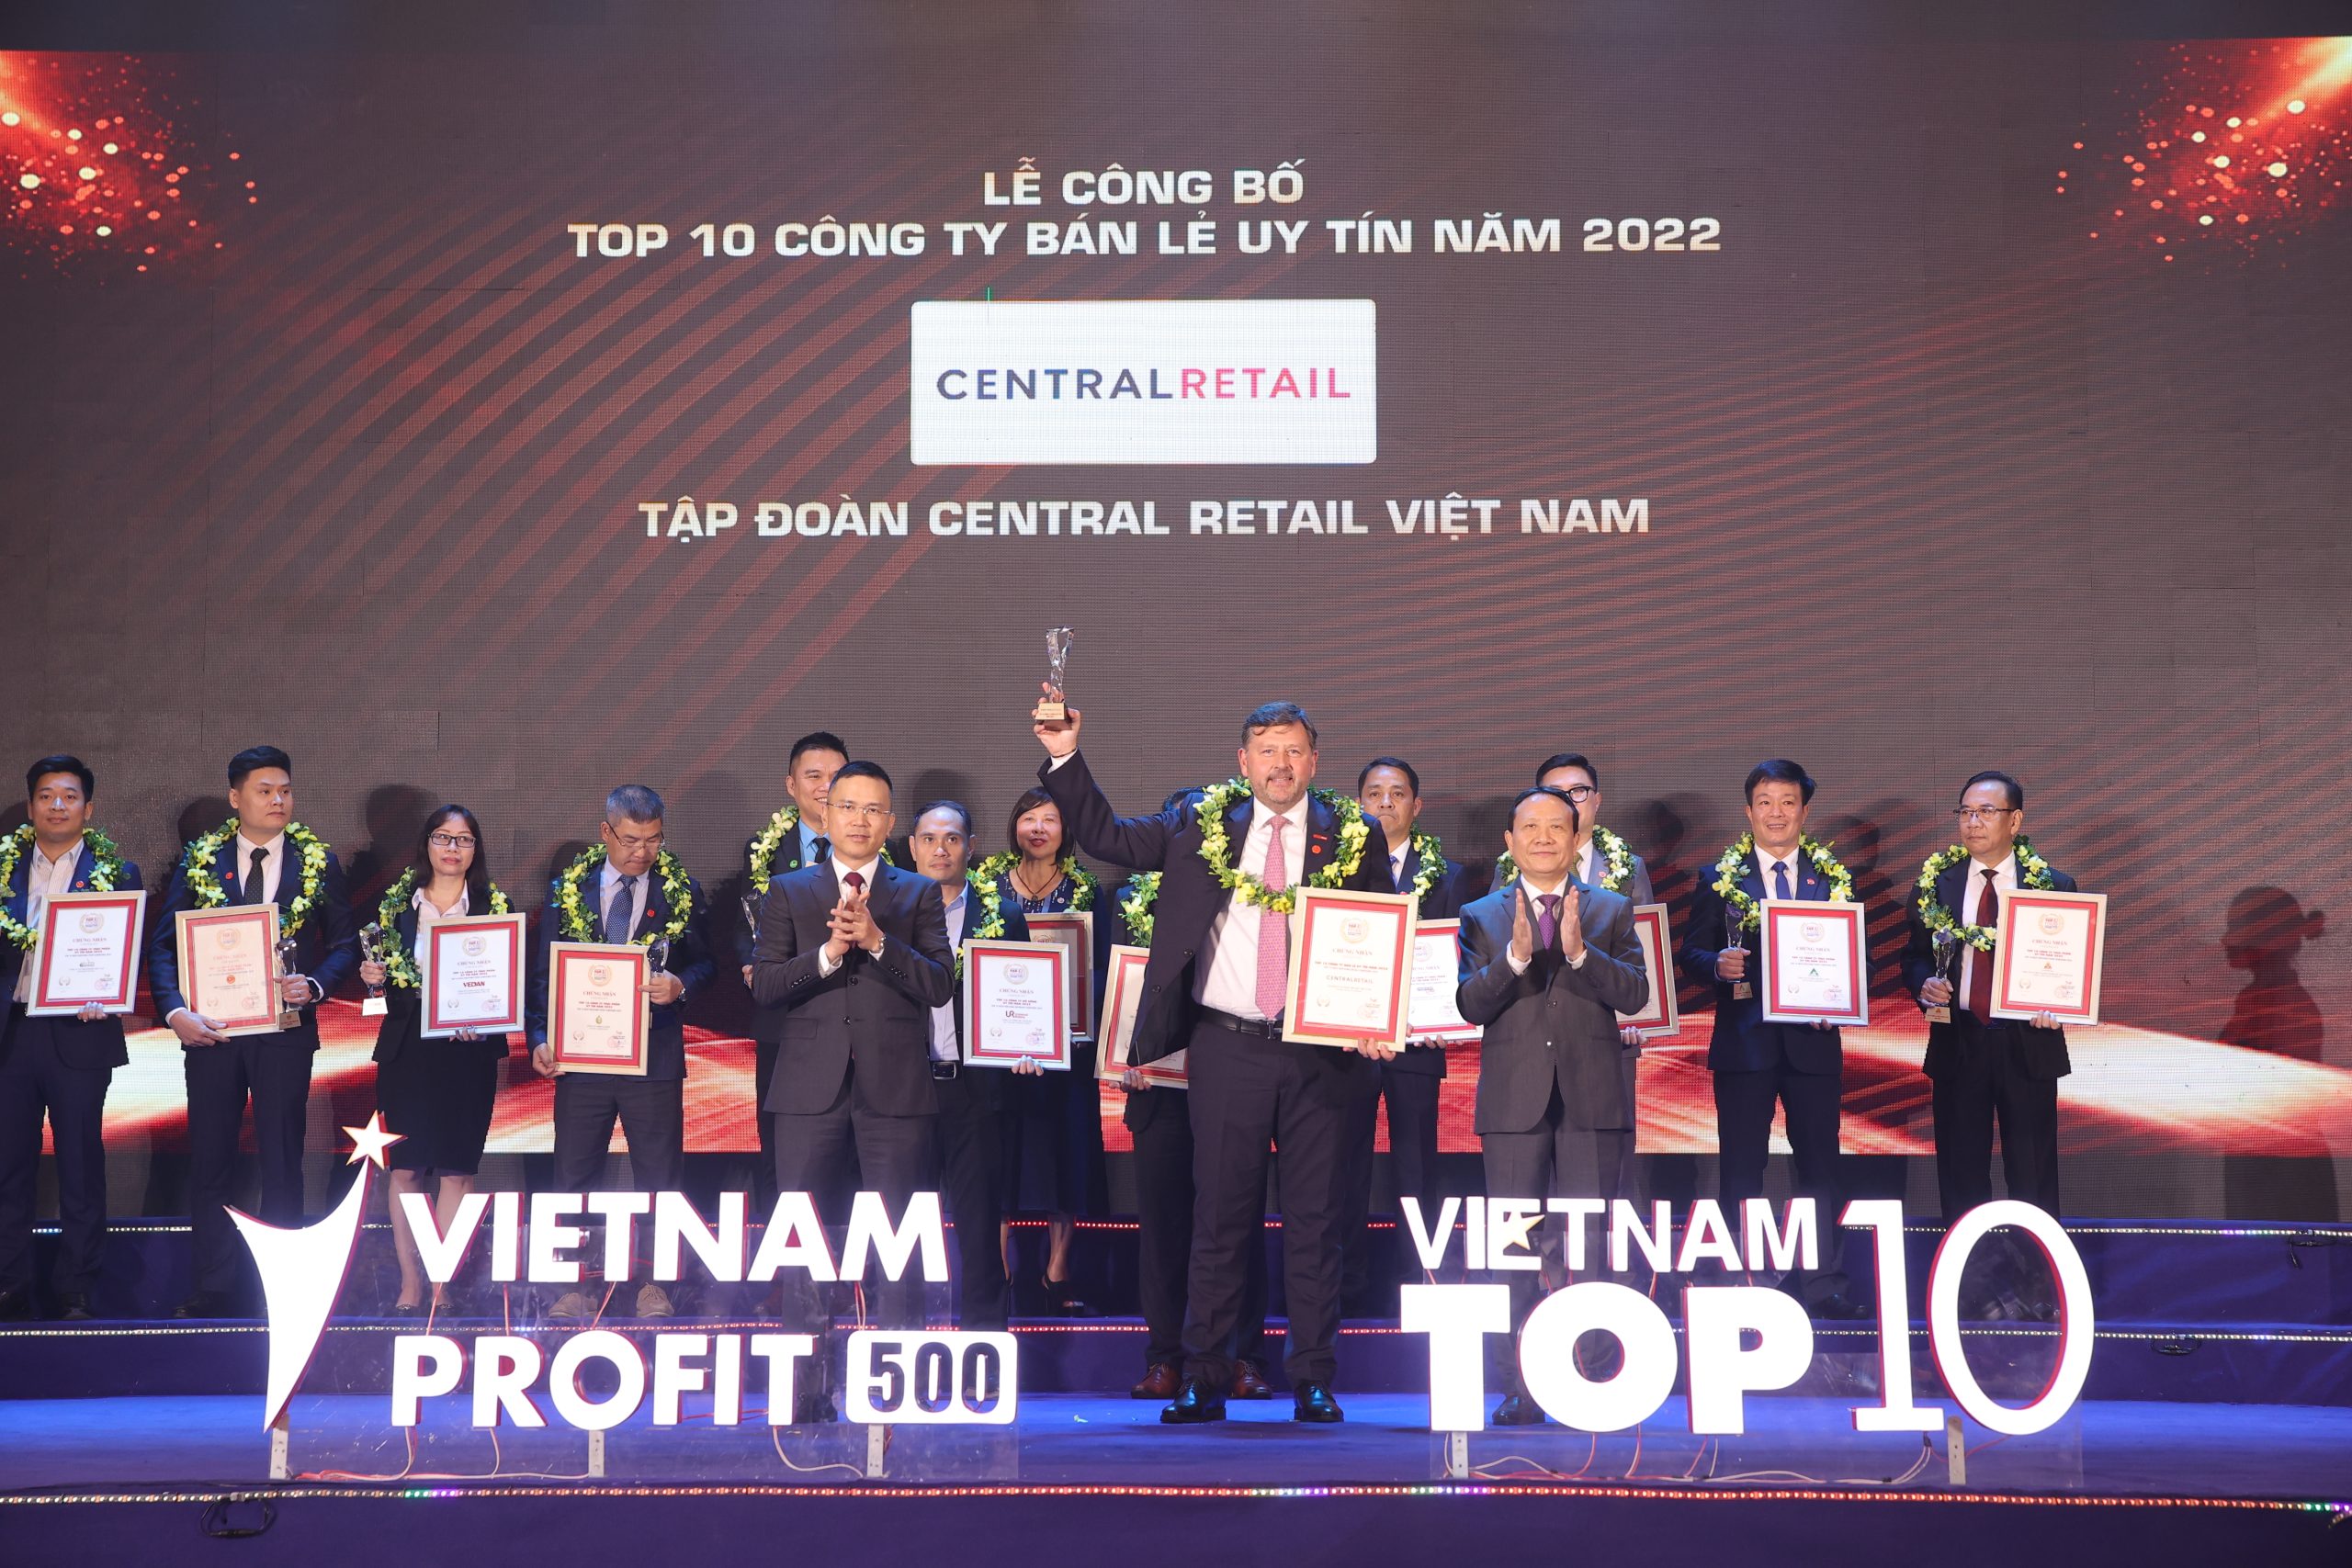 Central Retail Vietnam was ranked #1 in the “Top 10 reputable companies in the retail industry” for two consecutive years